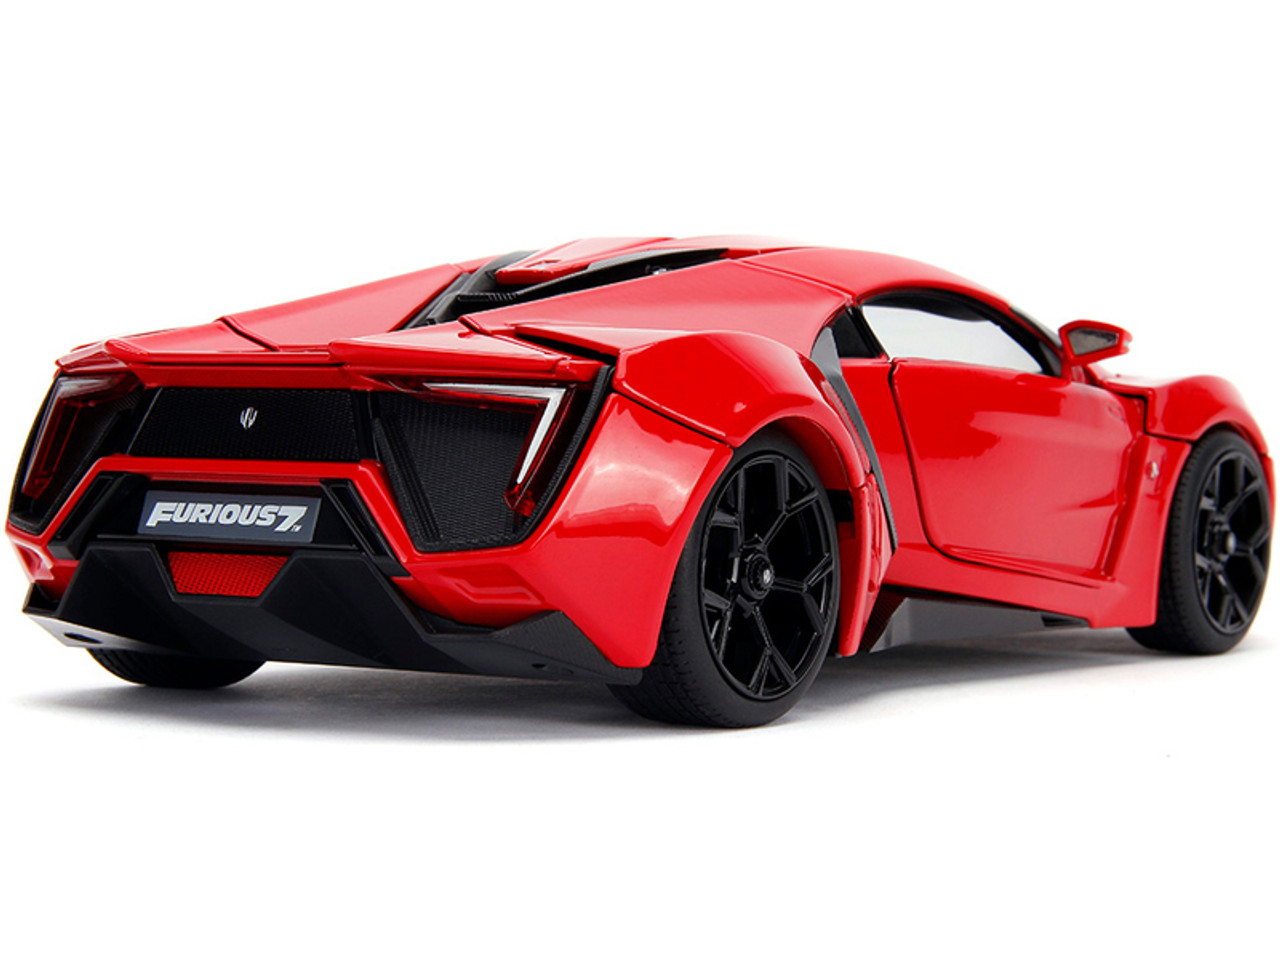 LYKAN Hypersport Fast And Furious 7 1/18 figurine dominique Torretto